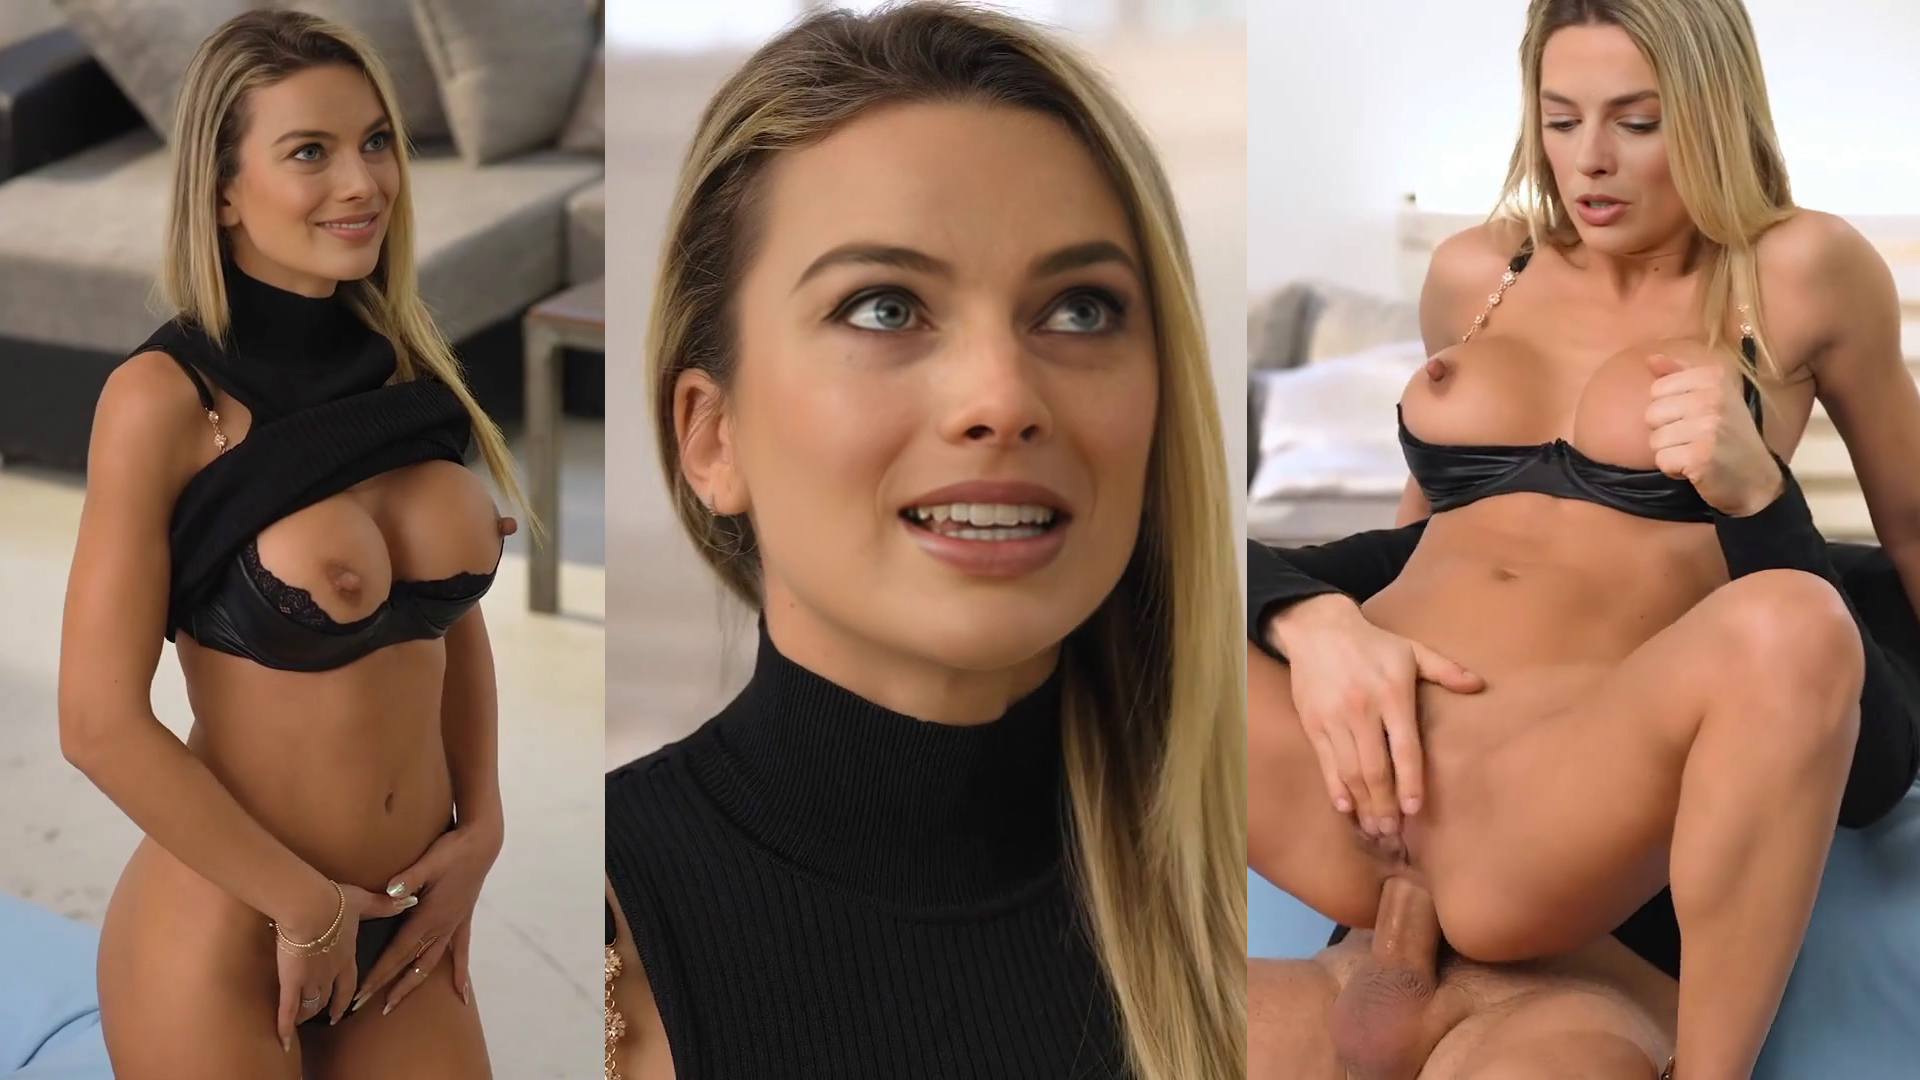 Not Margot Robbie Busty Anal (Preview - 30:57)